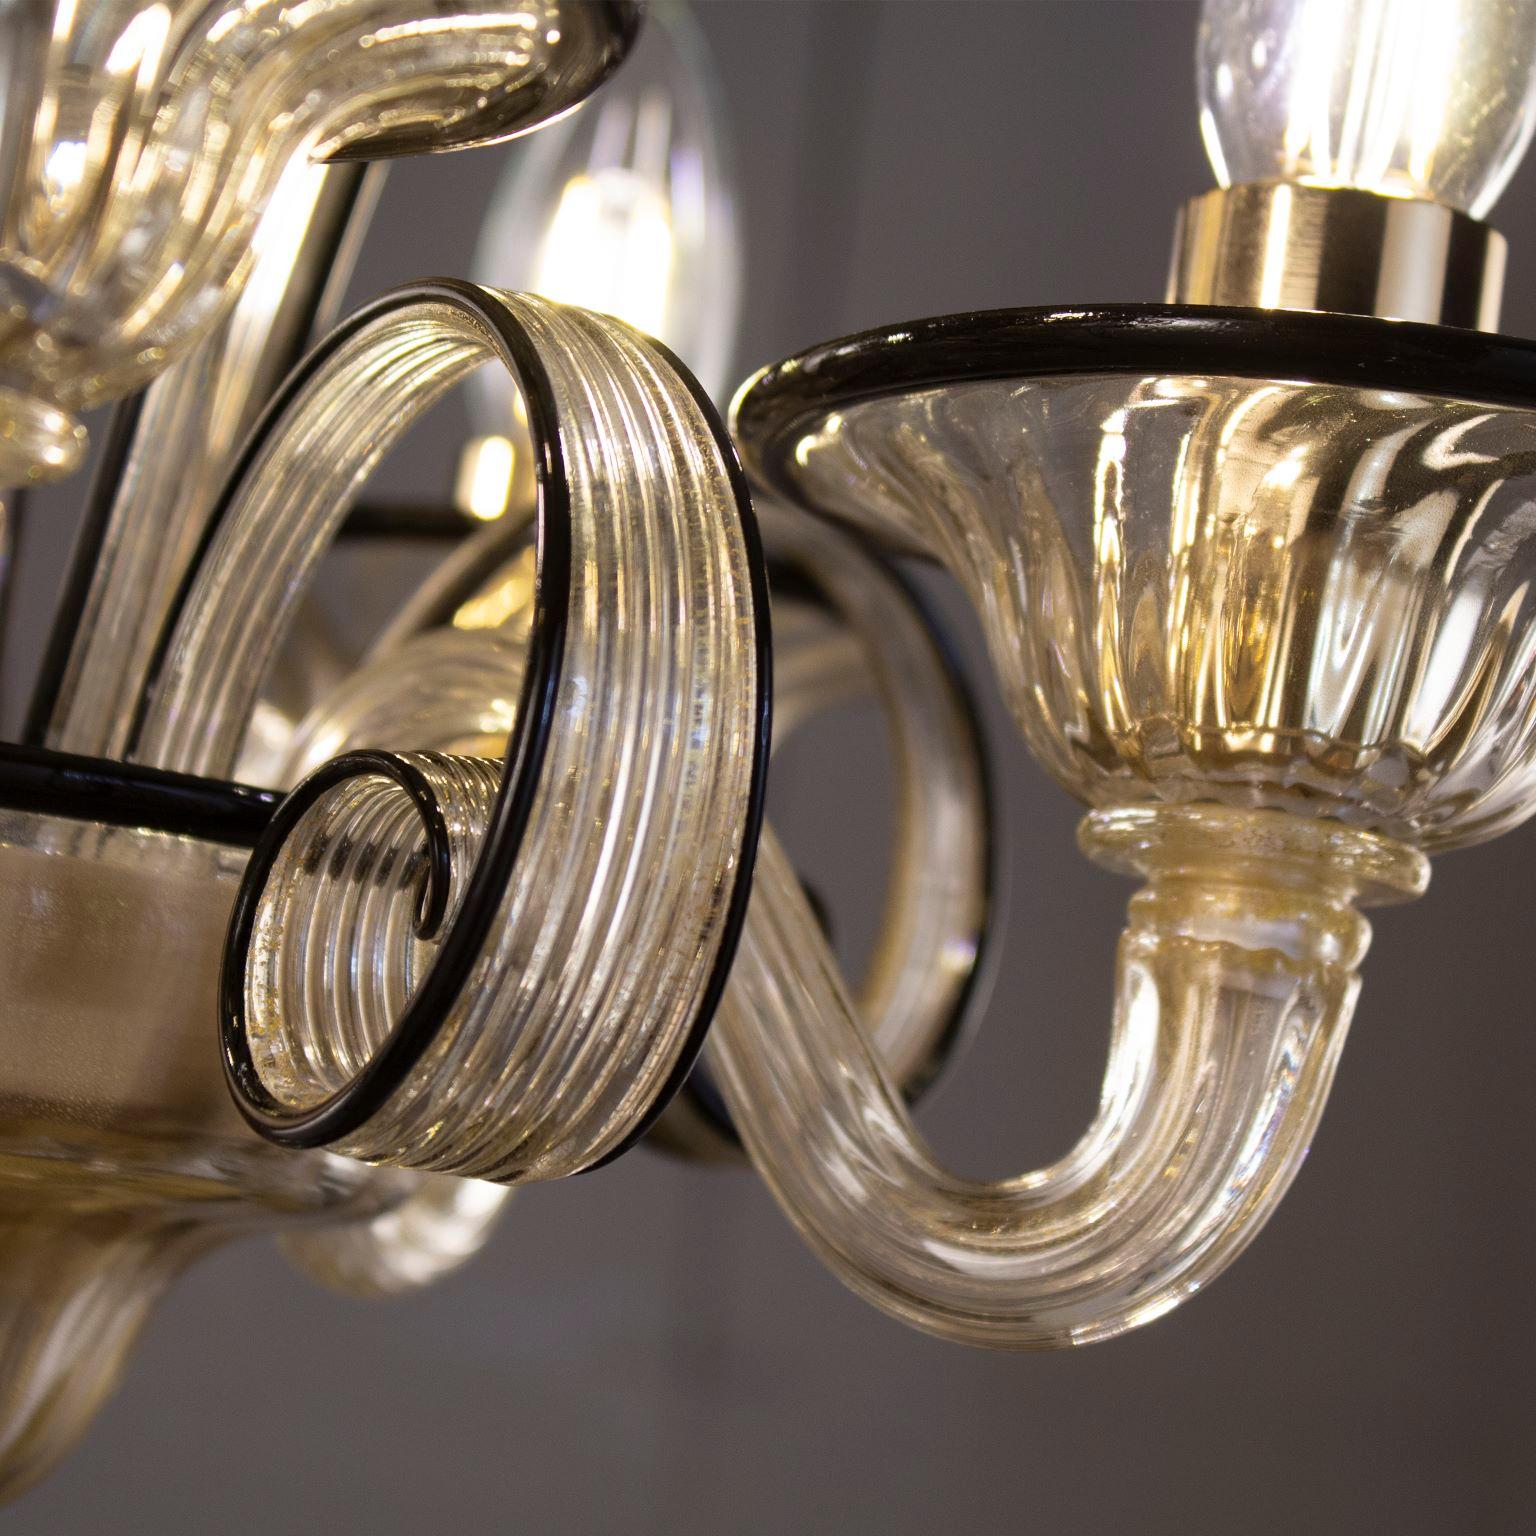 Capriccio chandelier, 5 lights, golden leaf artistic glass, with curly ornamental elements and black details by Multiforme.
Inspired by the Classic Venetian tradition it is characterised by a central column where many blown glass “pastoral” elements